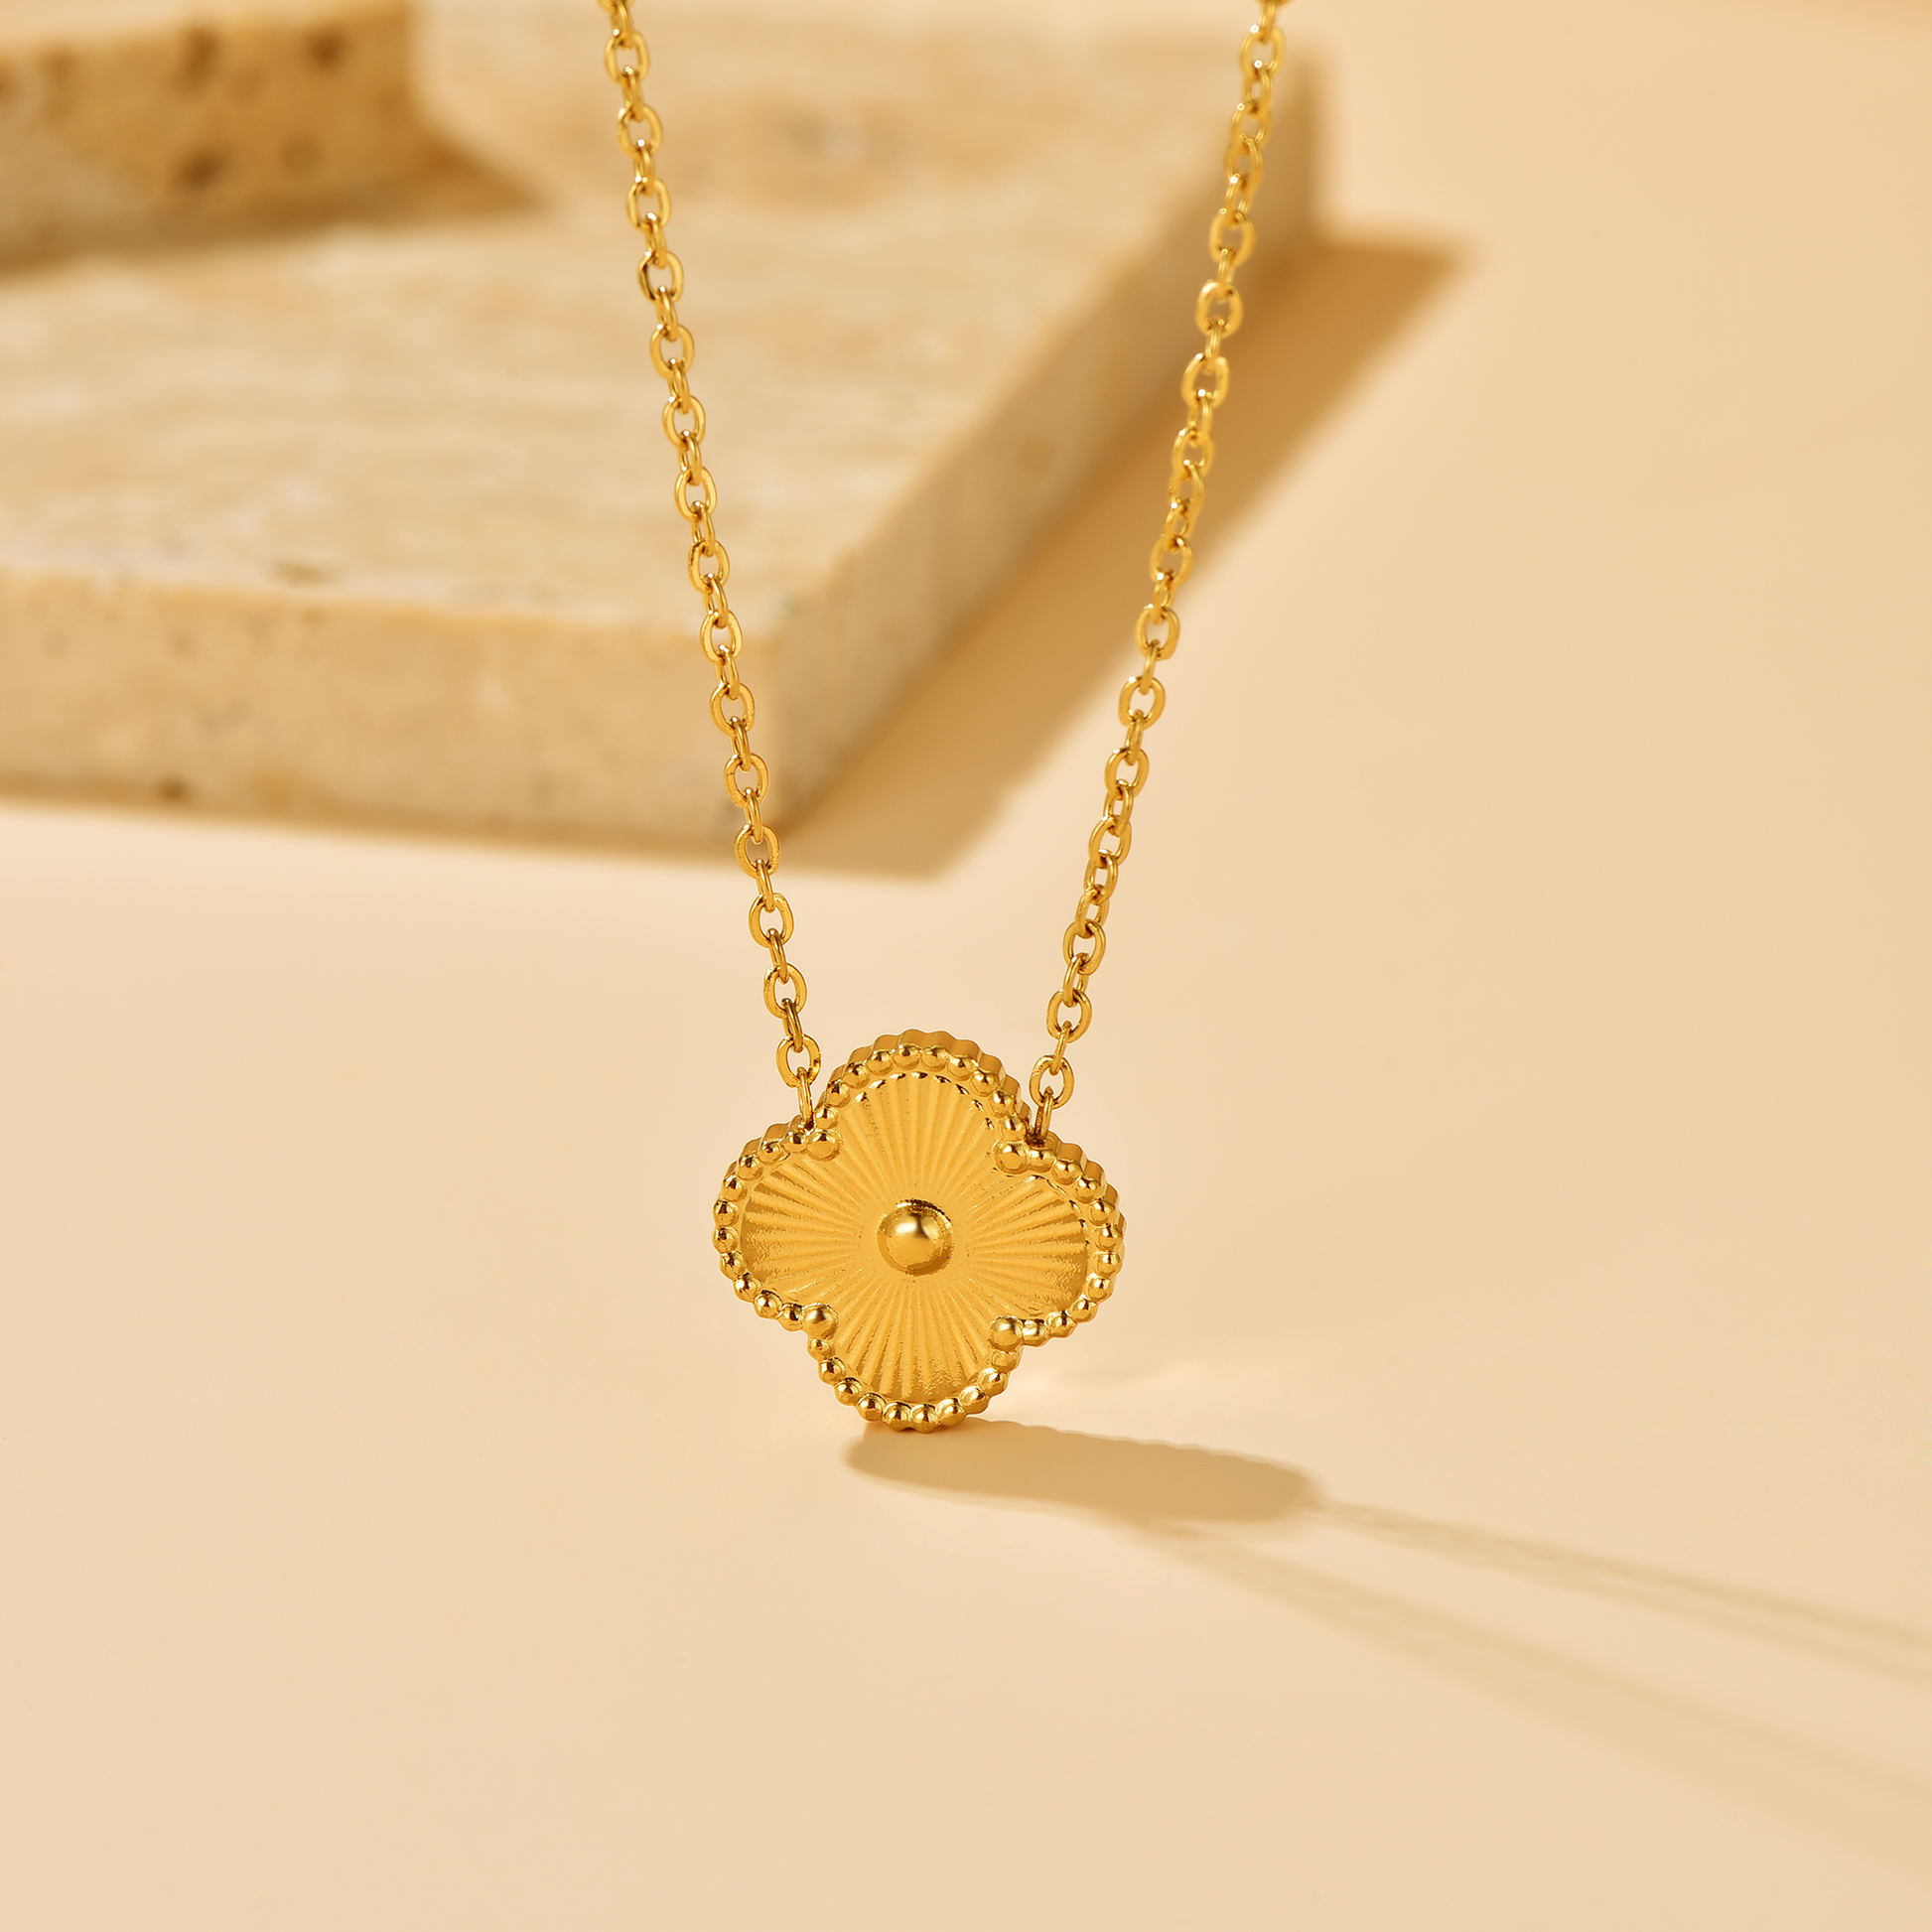 Clover Pendant Necklace - 18K Gold Plated - Waterproof - Tarnish-free -  Hypoallergenic - Stainless Steel / Surgical Steel